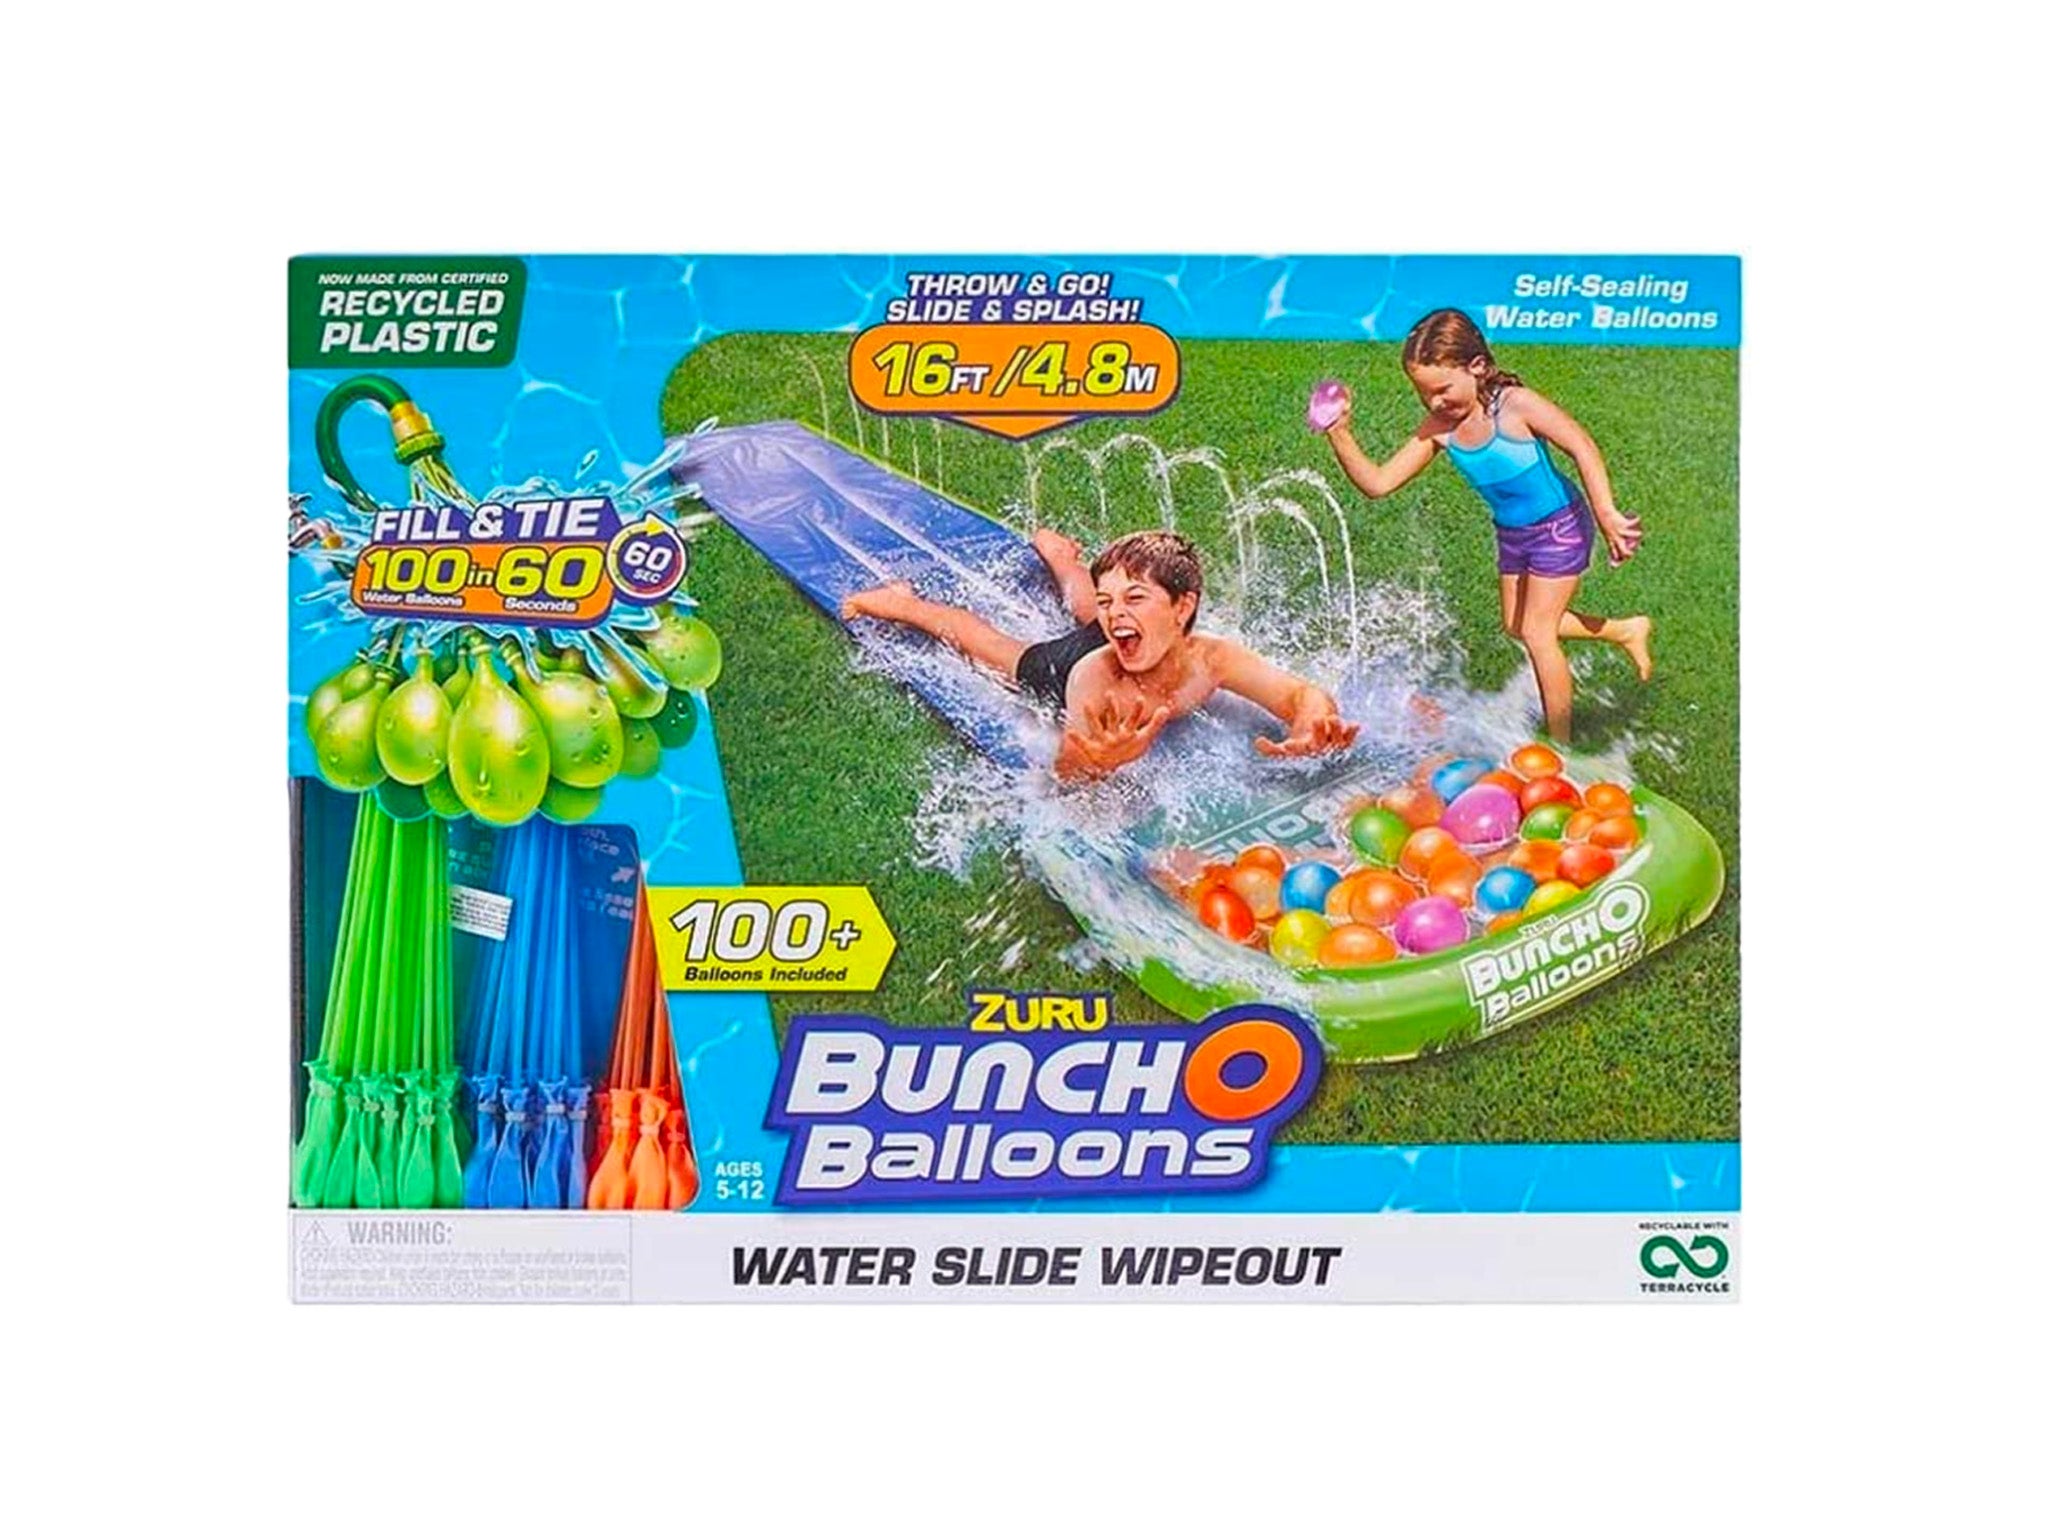 Bunch o Balloons water slide wipeout